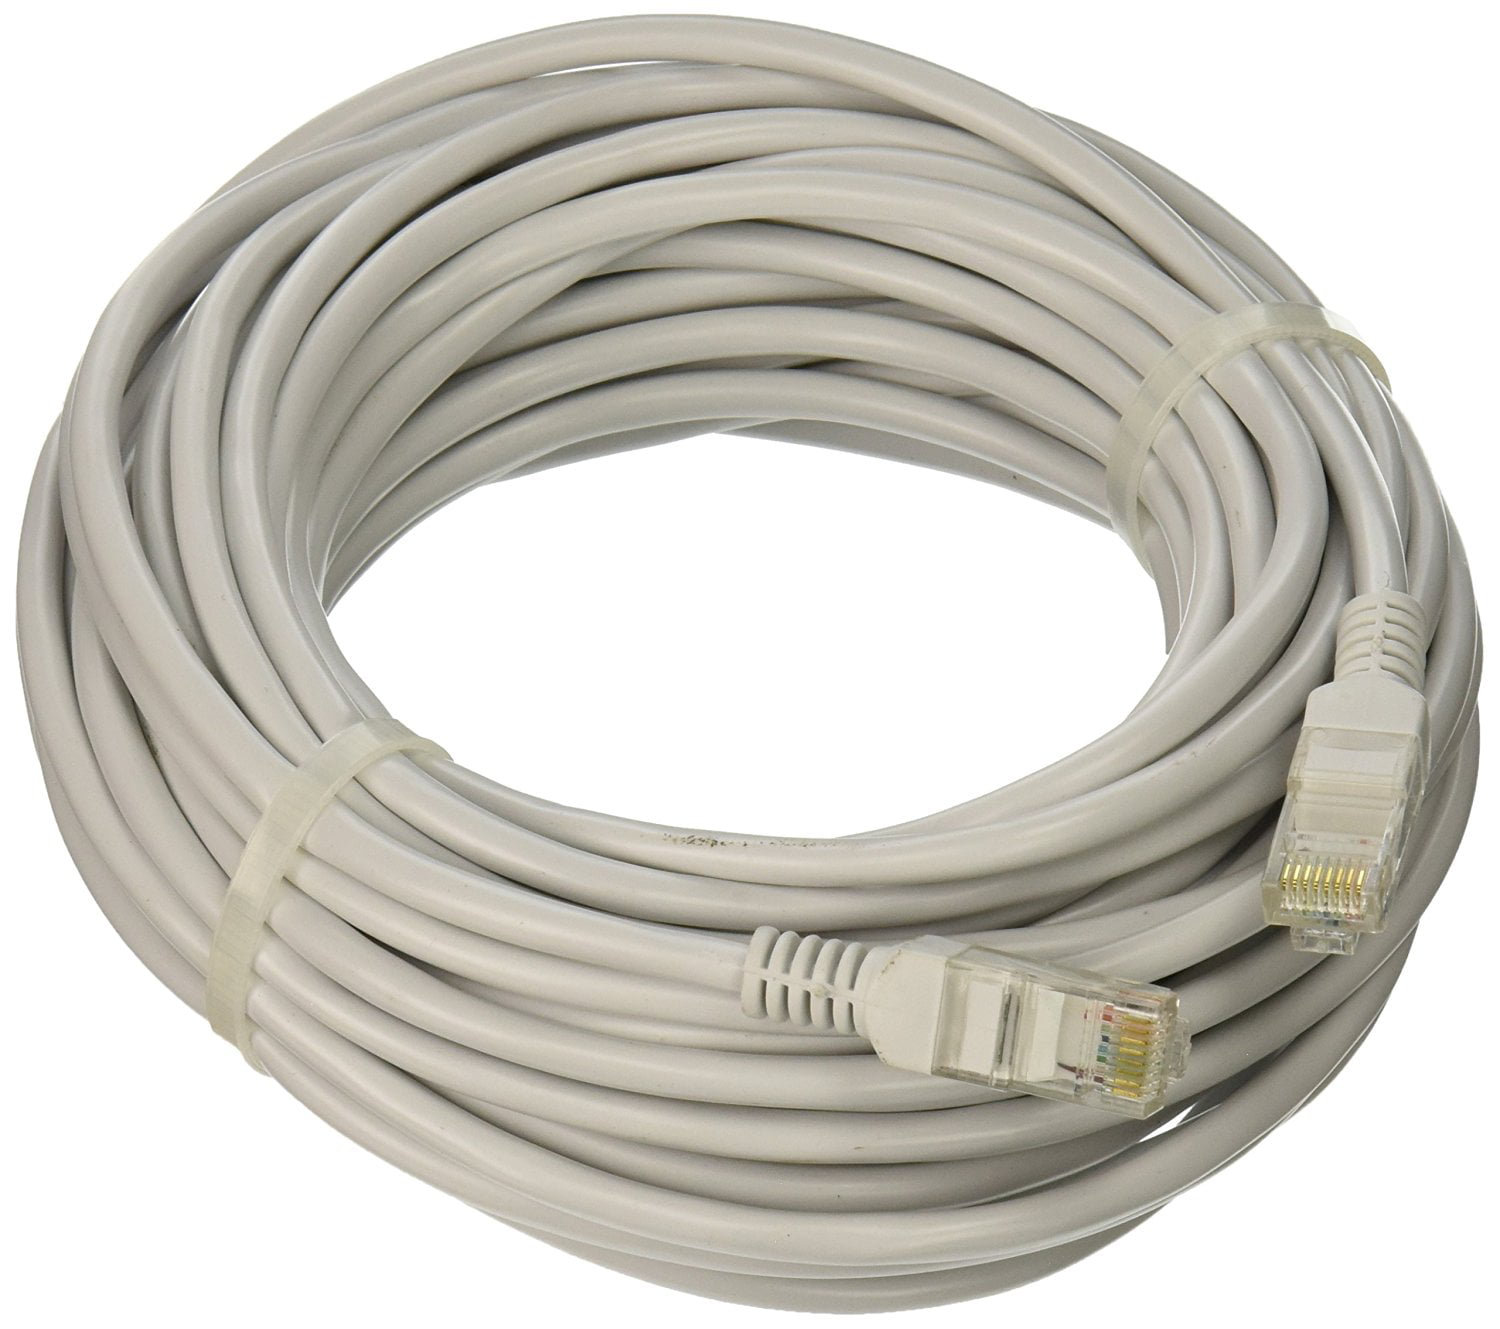 White 50 Feet Cat5e Networking RJ45 Ethernet Patch Cable